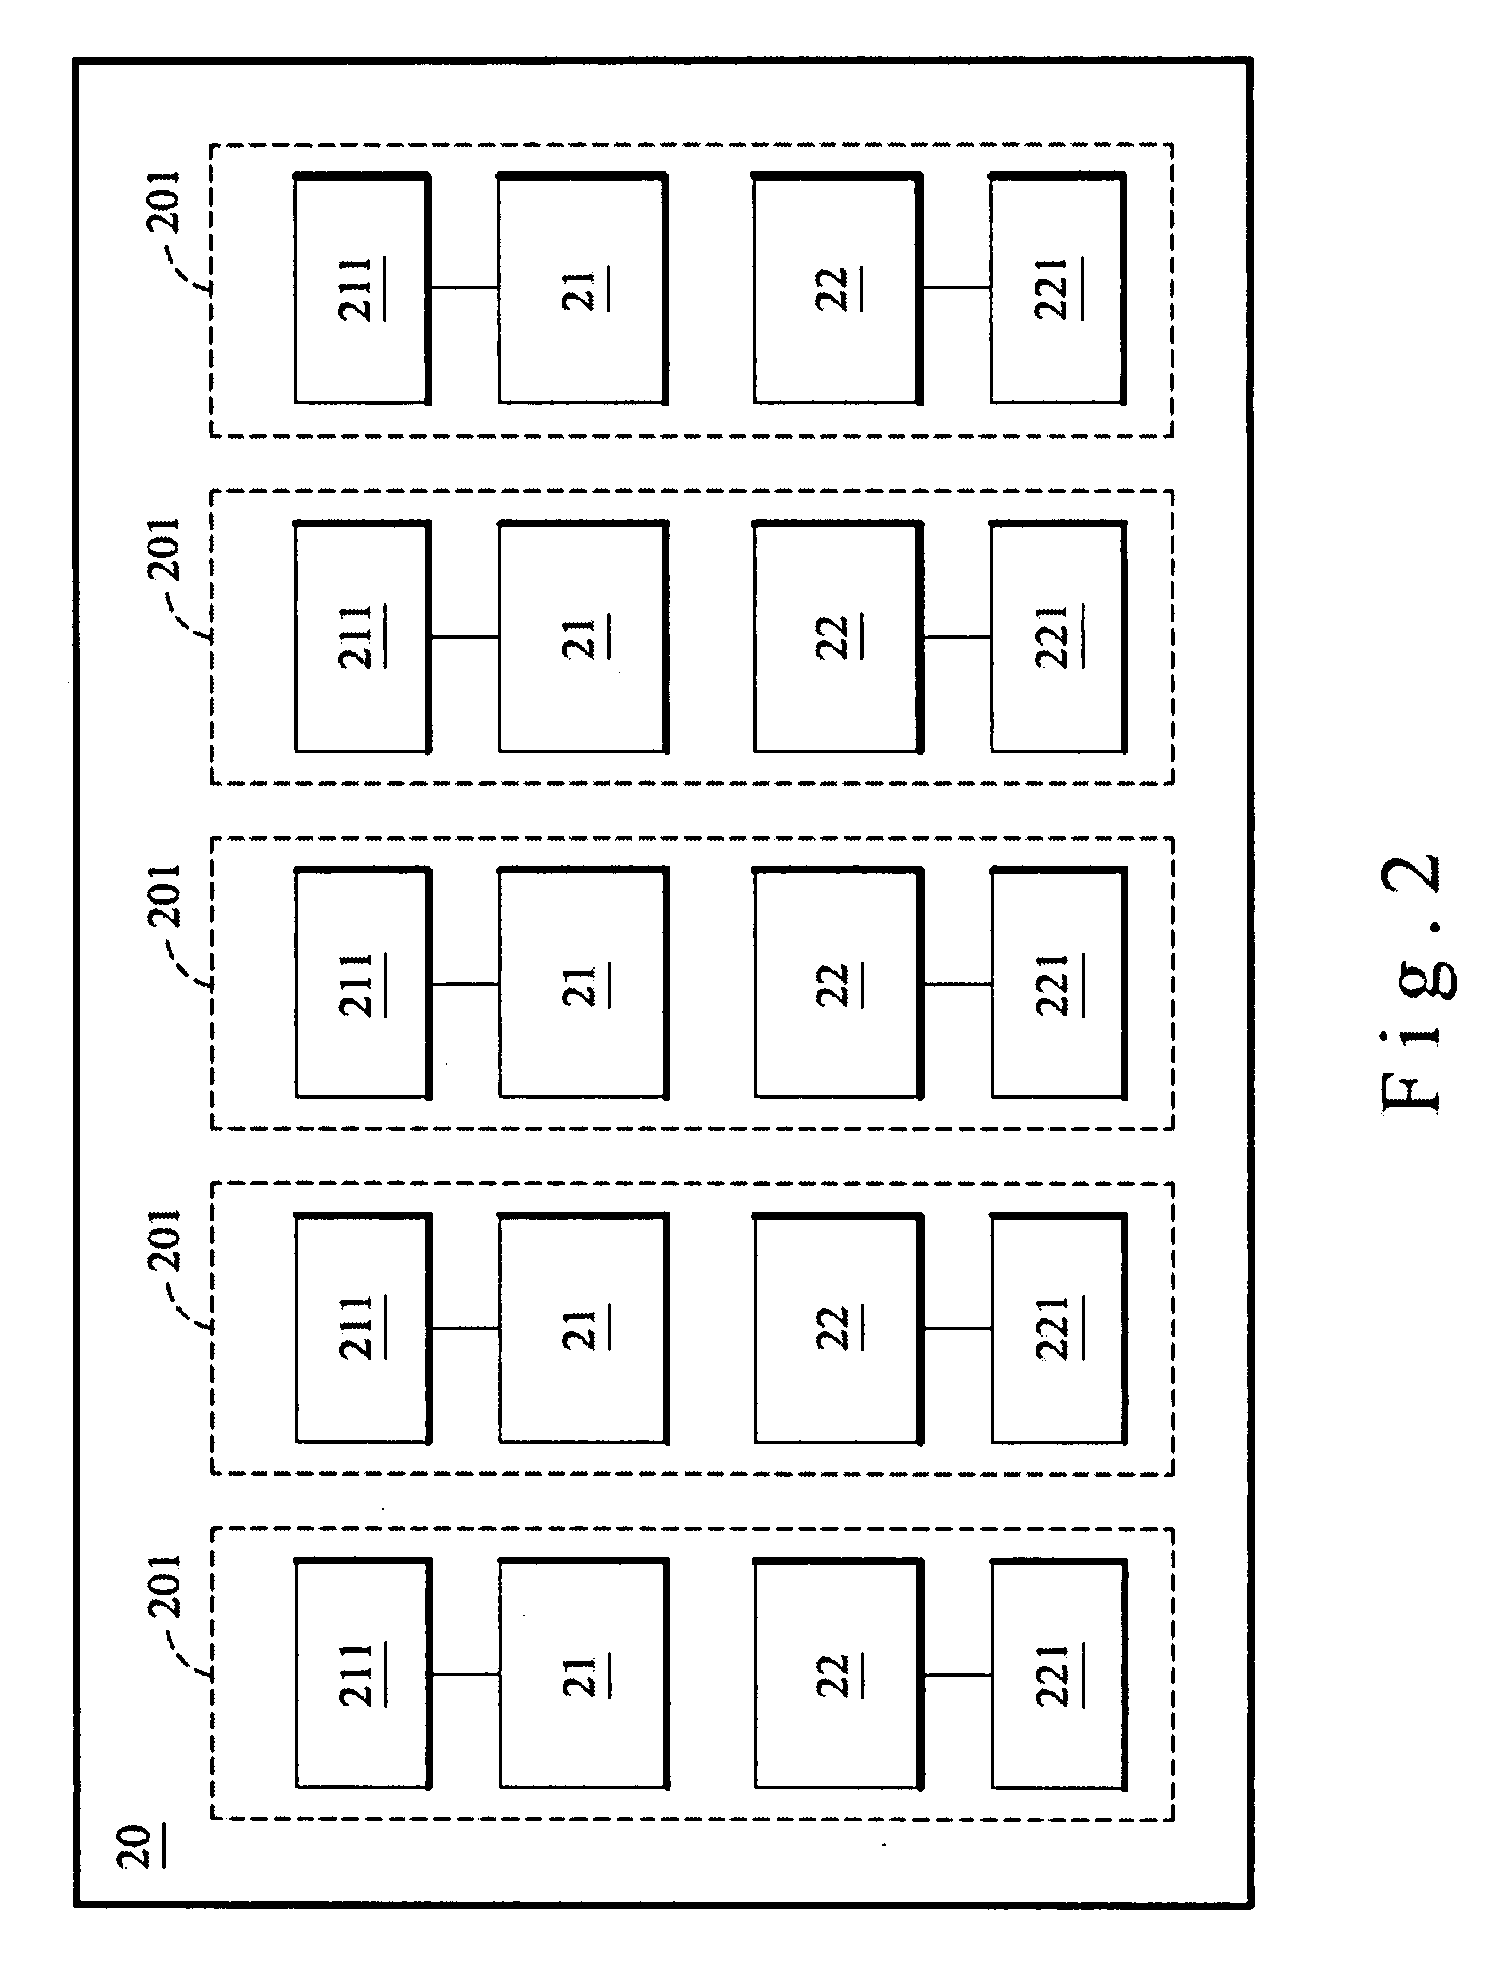 Structure of test area for a semiconductor tester